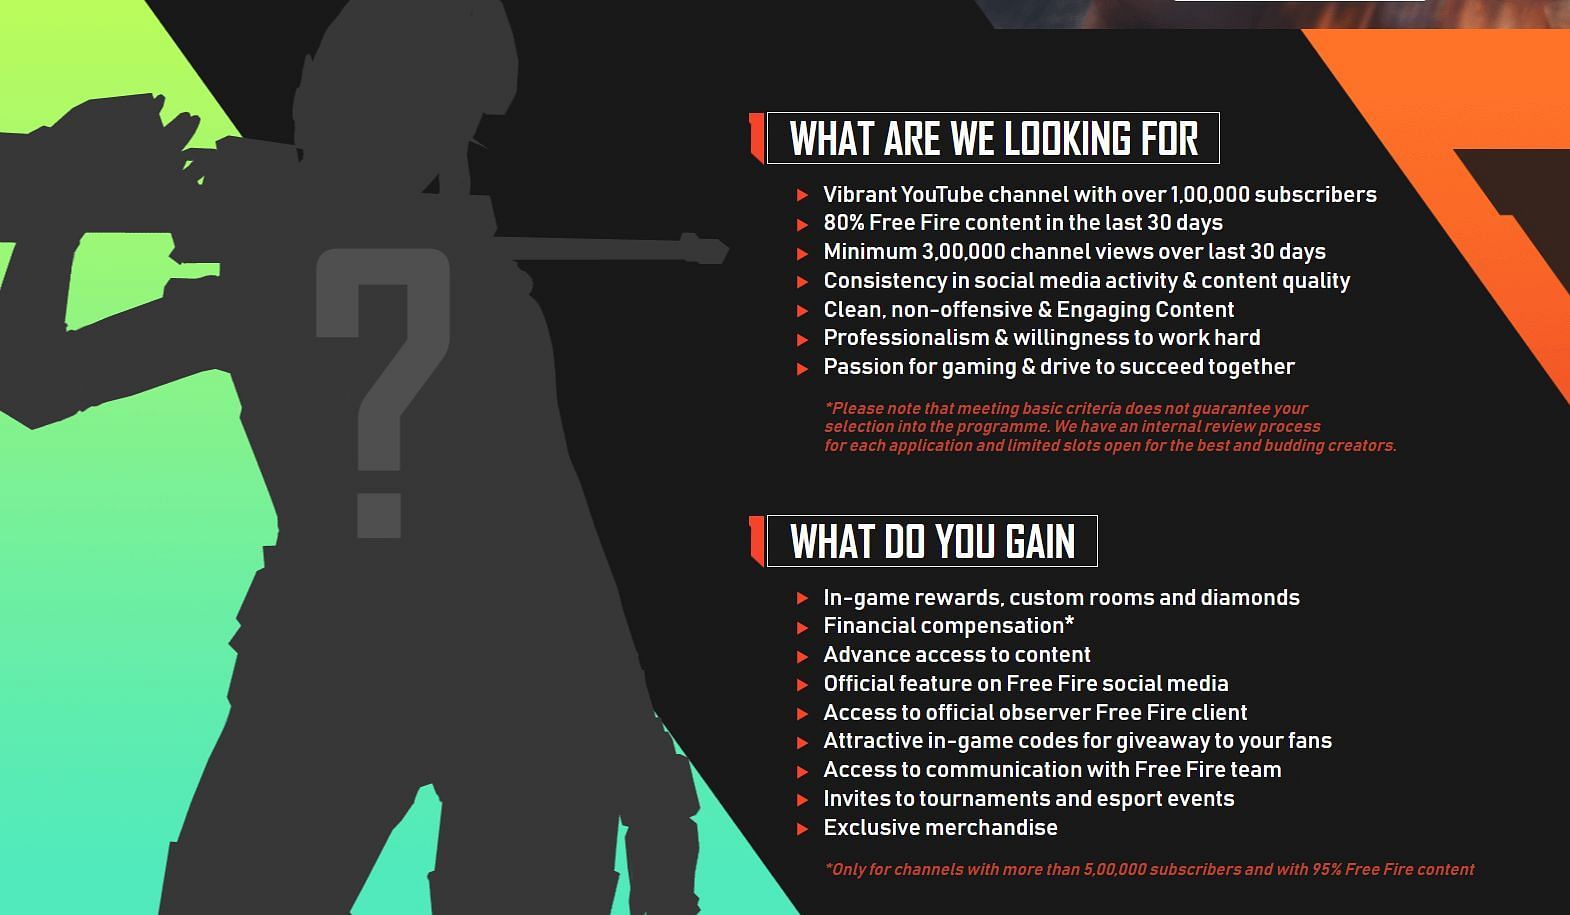 The minimum requirements and perks of joining partner program (Image via Free Fire)